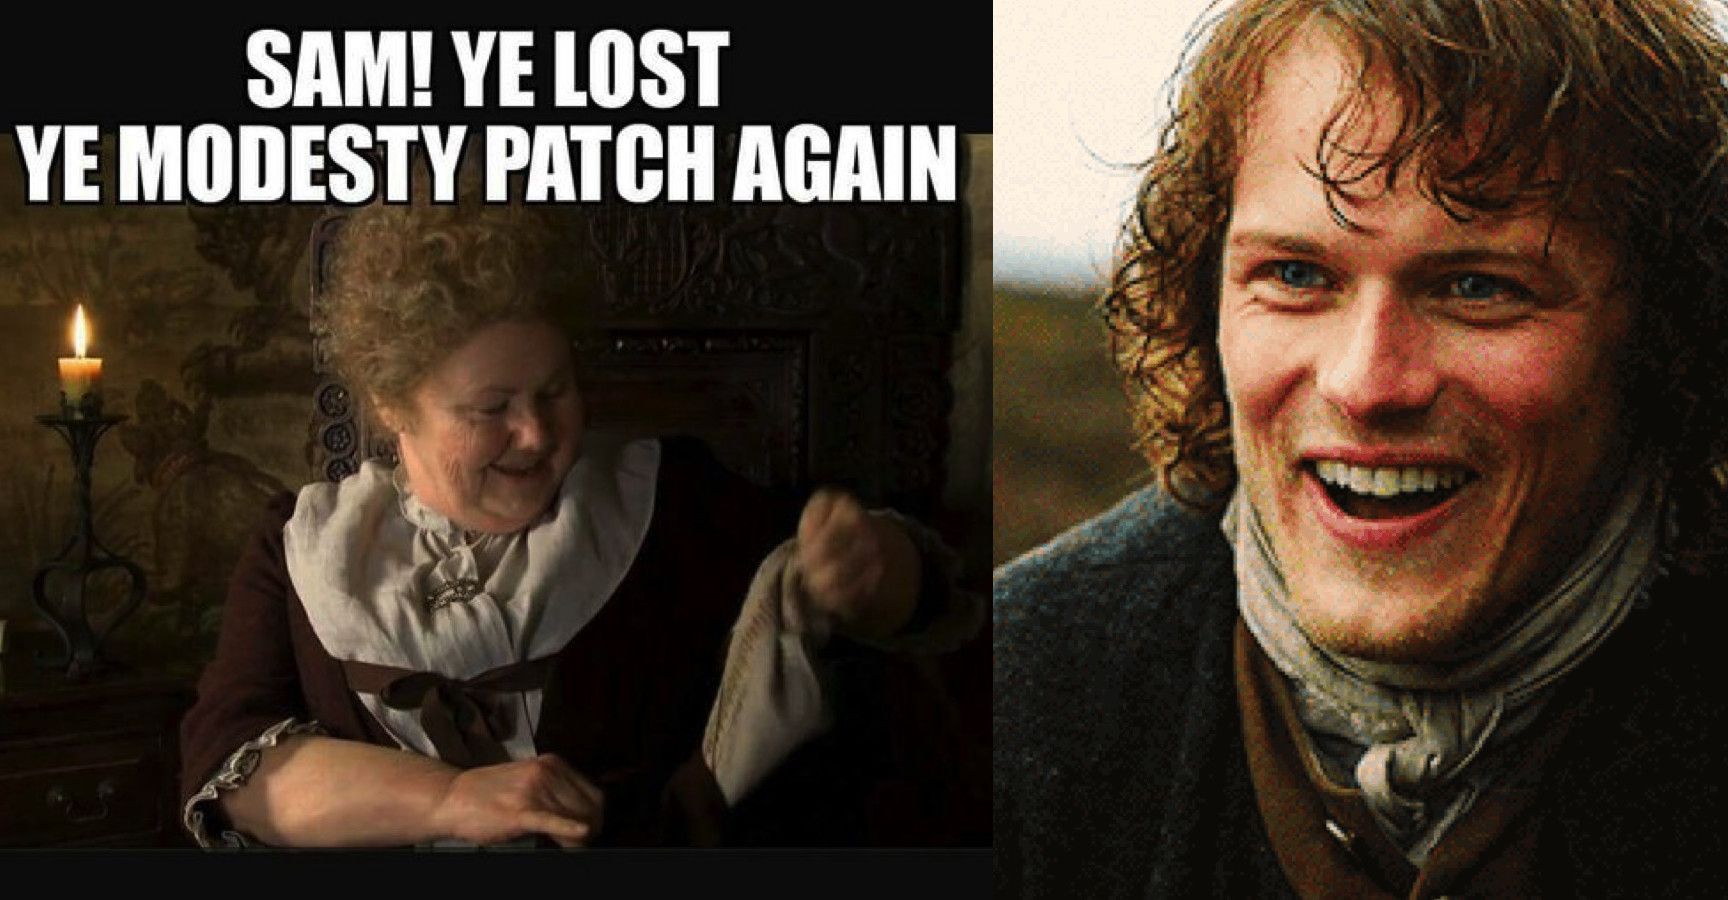 15 Hilariously Inappropriate Outlander Memes That Will Make You Blush